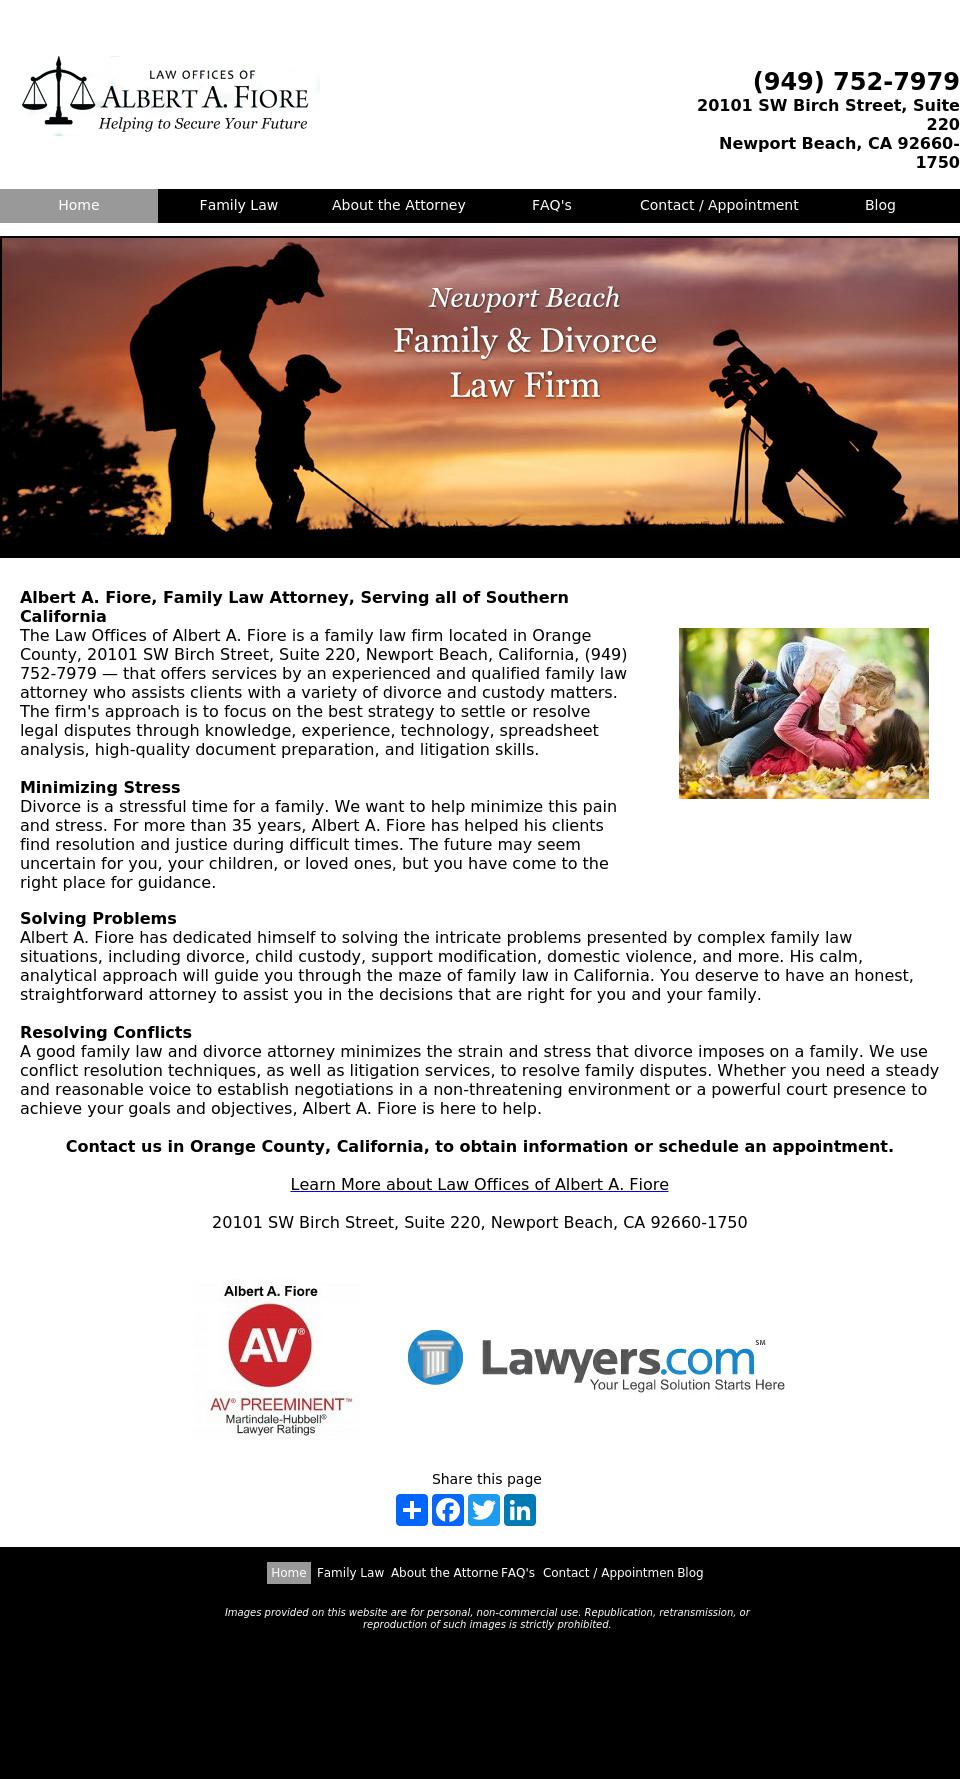 Farnell & Norman-Trial Lawyers Personal Injury And Employment Law - Newport Beach CA Lawyers